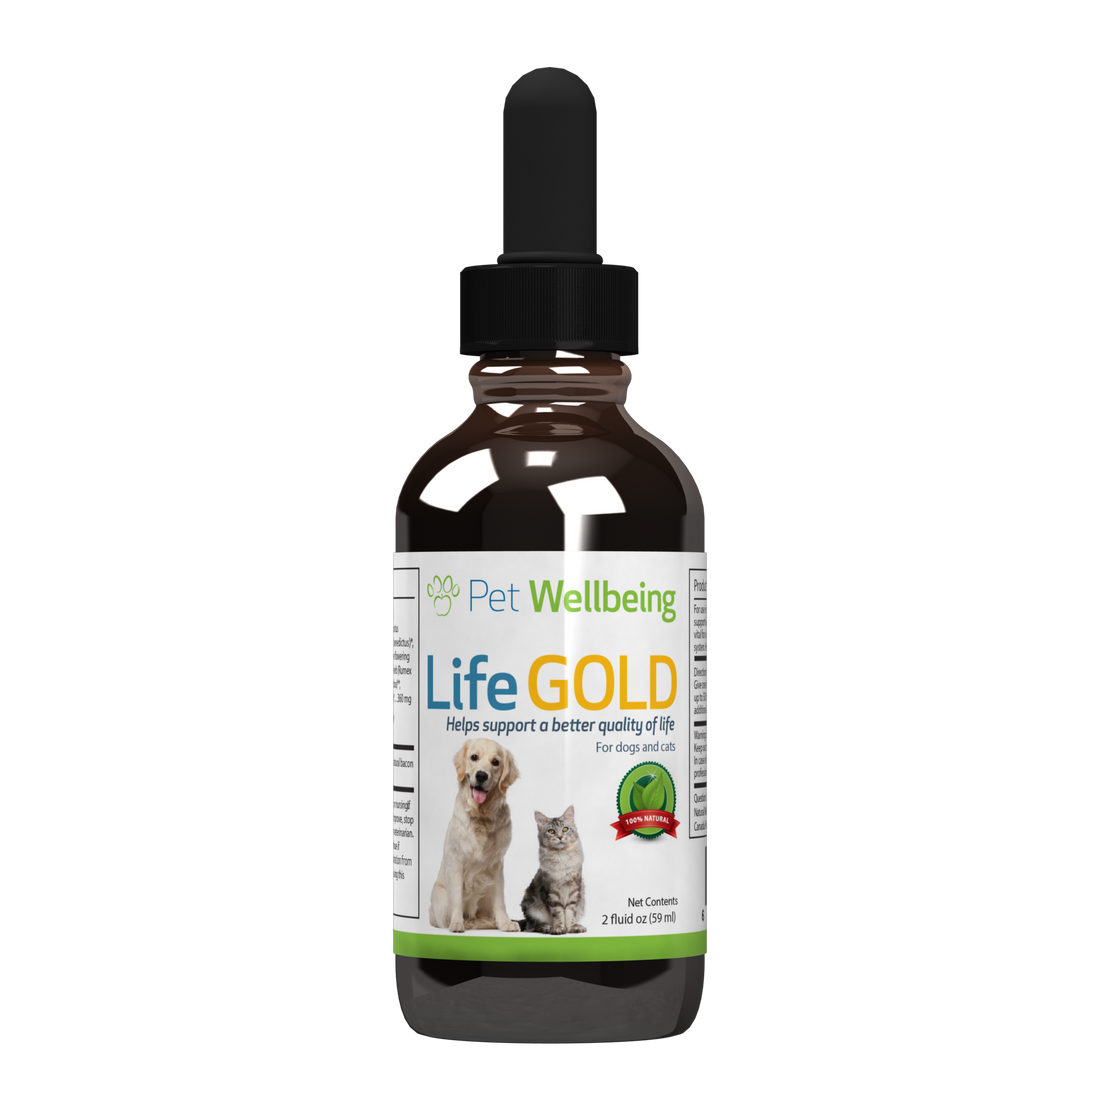 Pet WellBeing Life Gold - FREE Giveaway